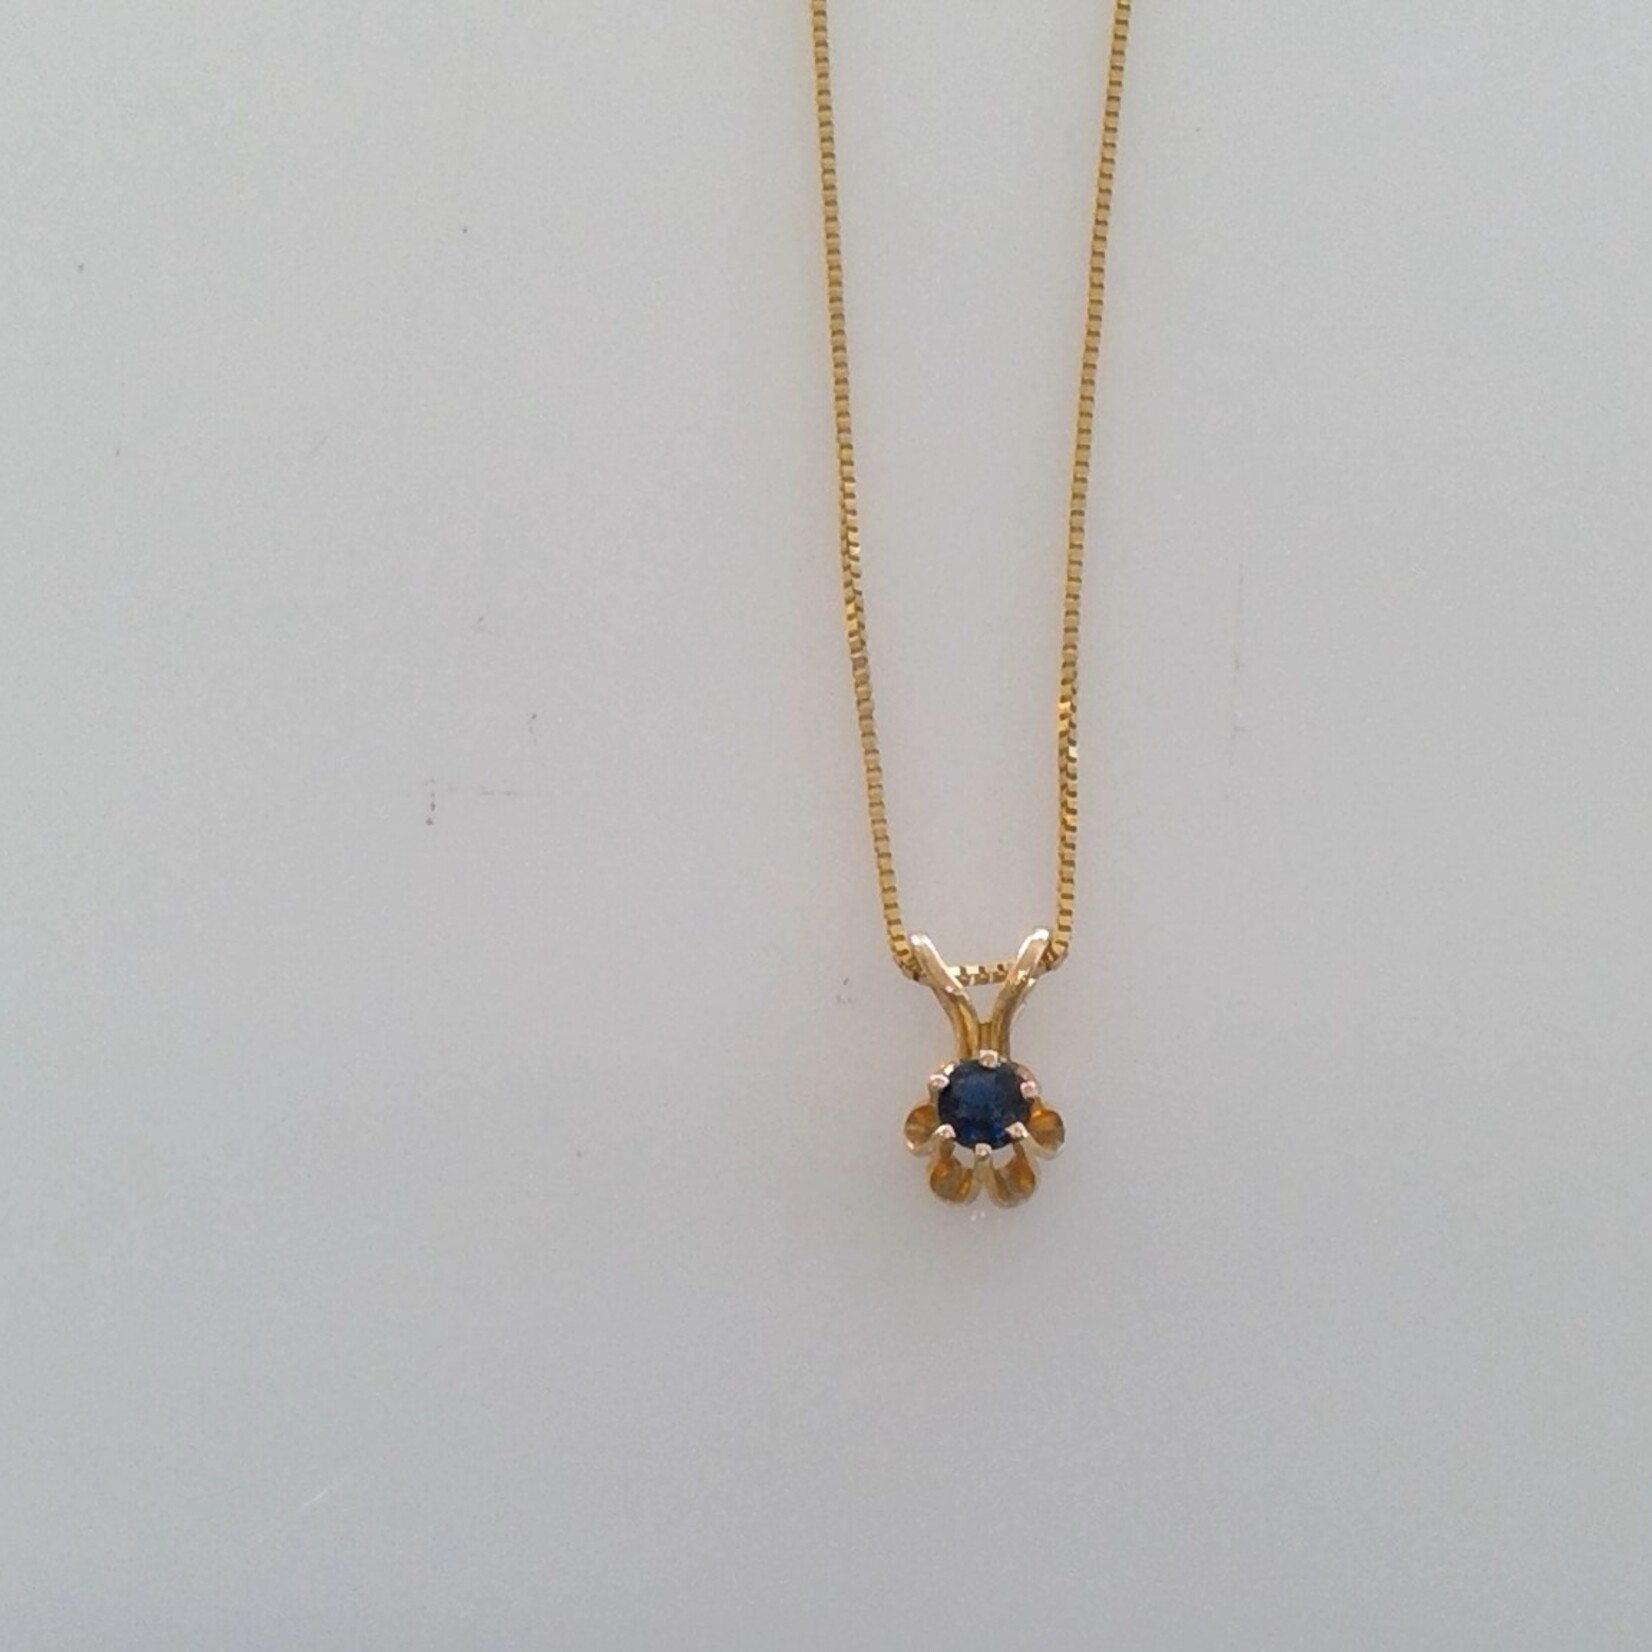 Franklin Jewelers 14kt Yellow Gold Box Chain with Sapphire Pendant